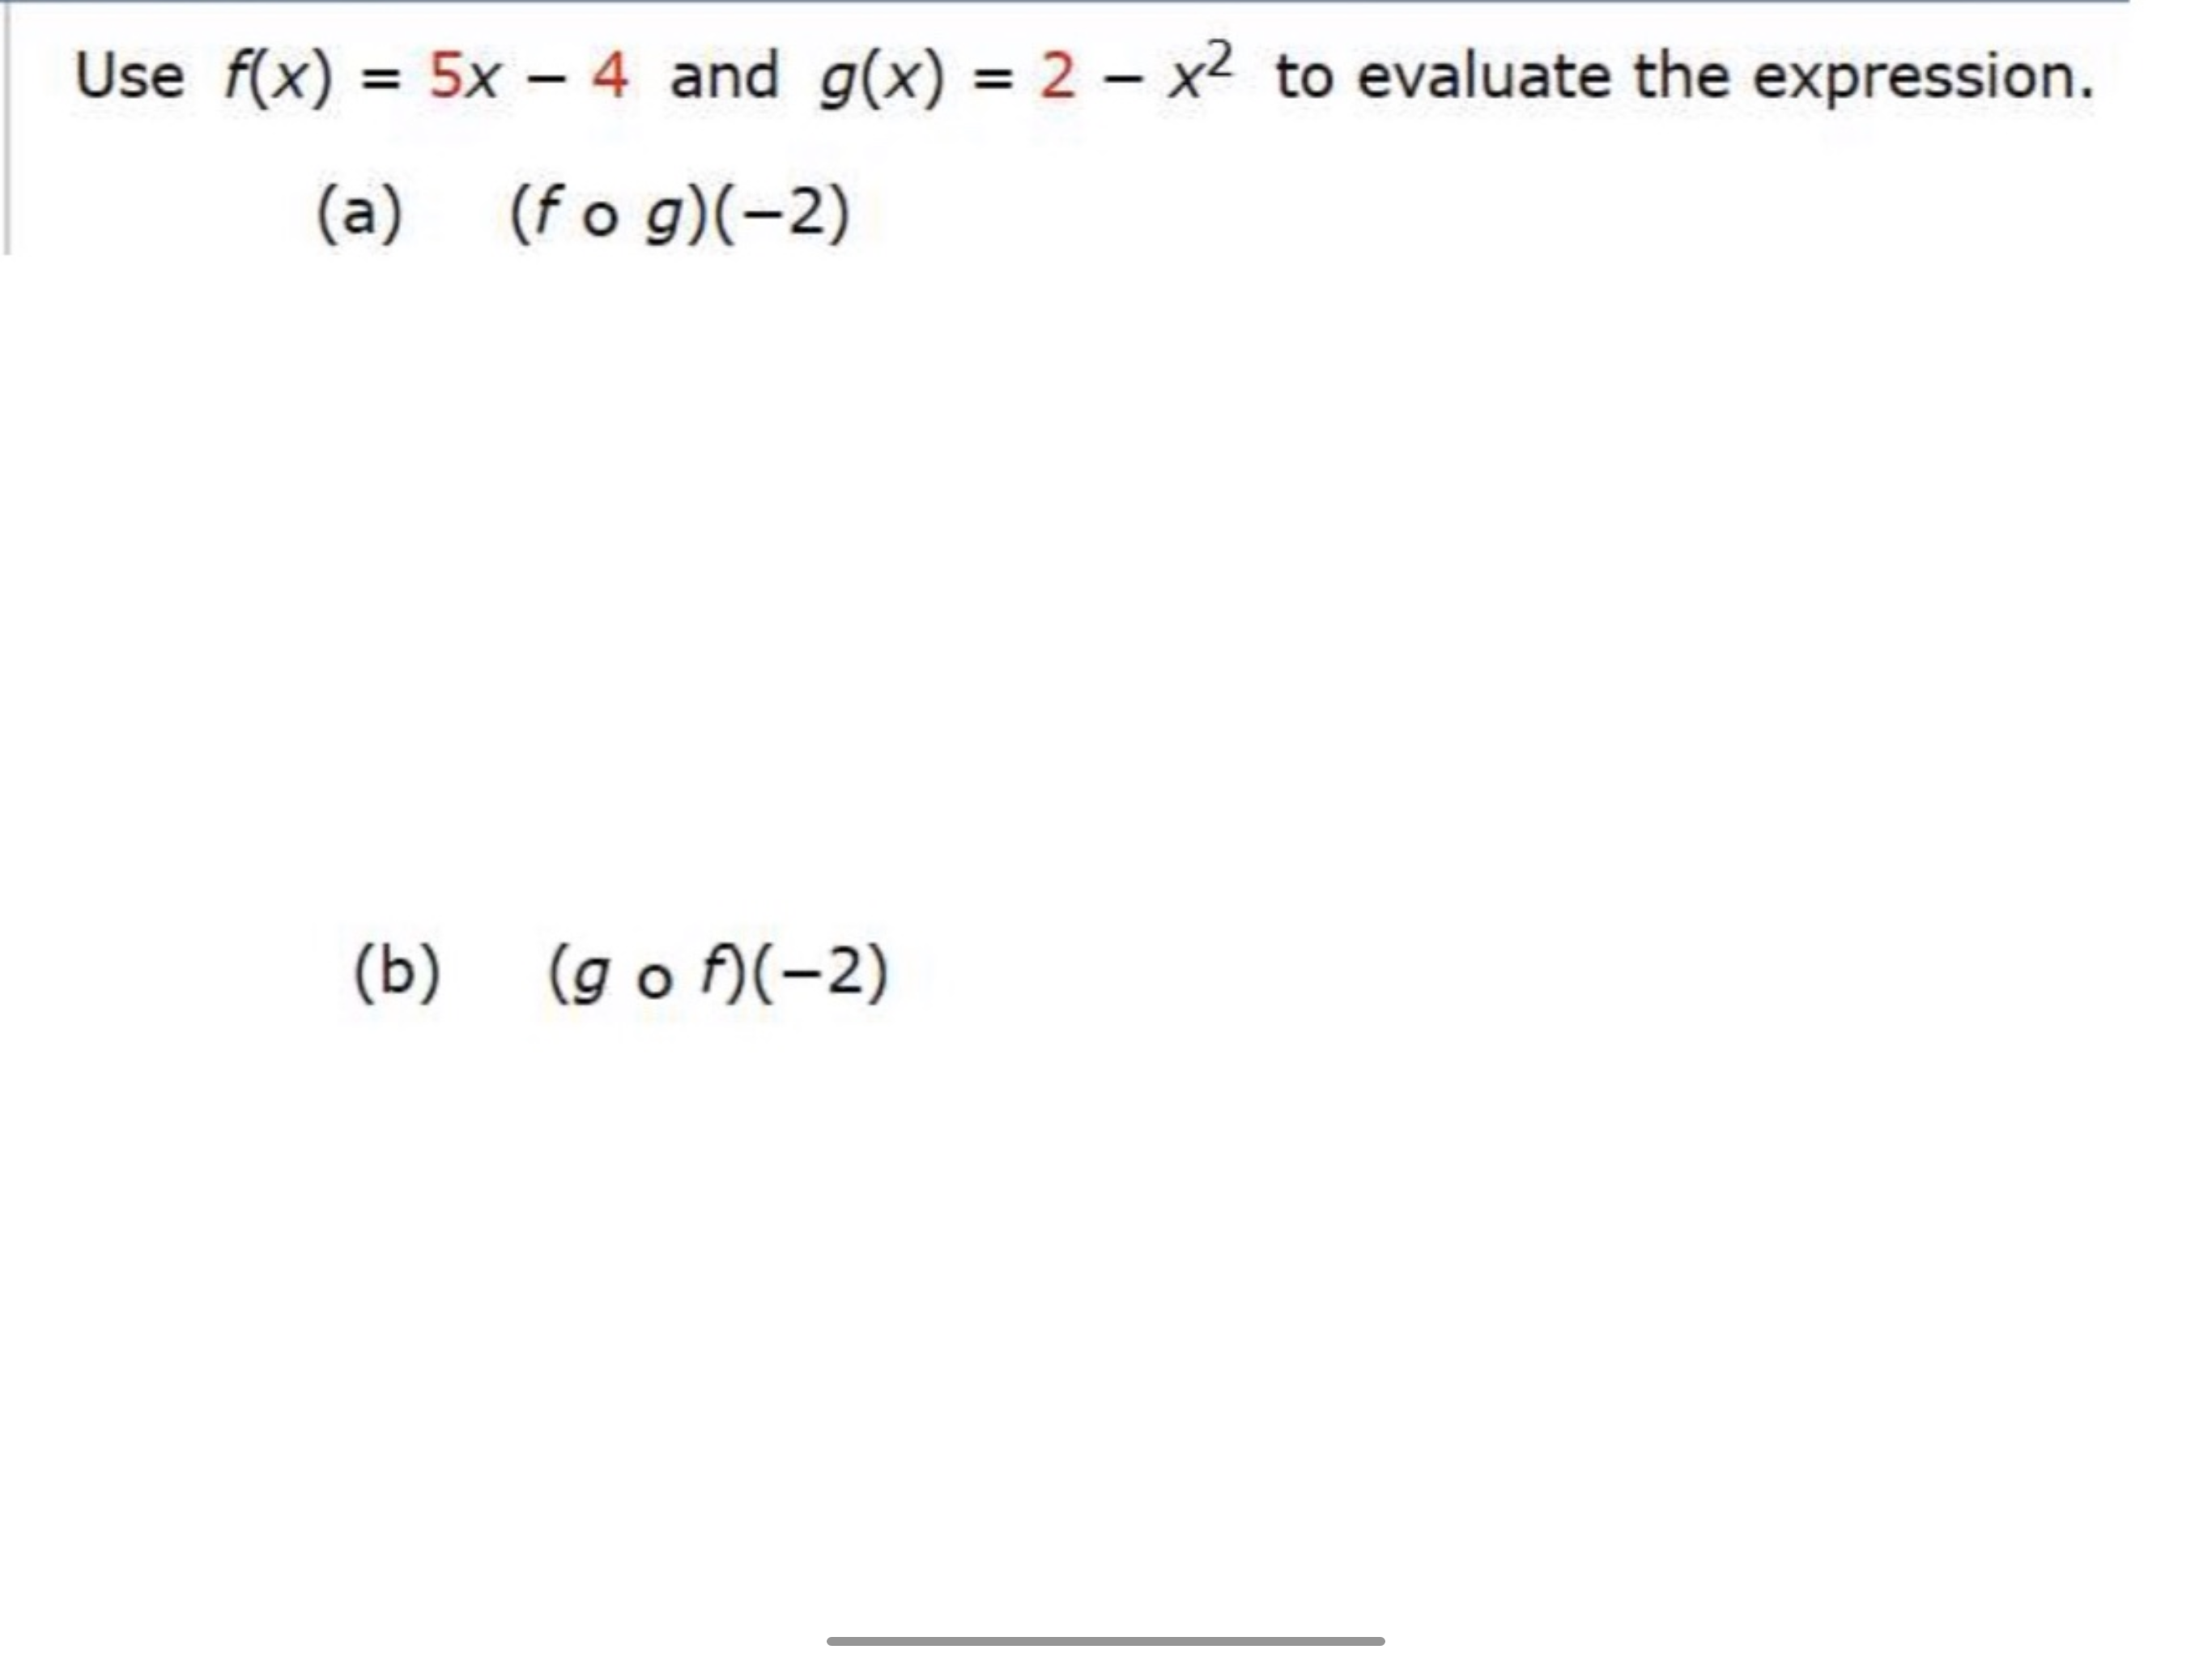 Use f(x) = 5x – 4 and g(x) = 2 – x2 to evaluate the expression.
(a)
(f o g)(-2)
(b) (go f)(-2)
